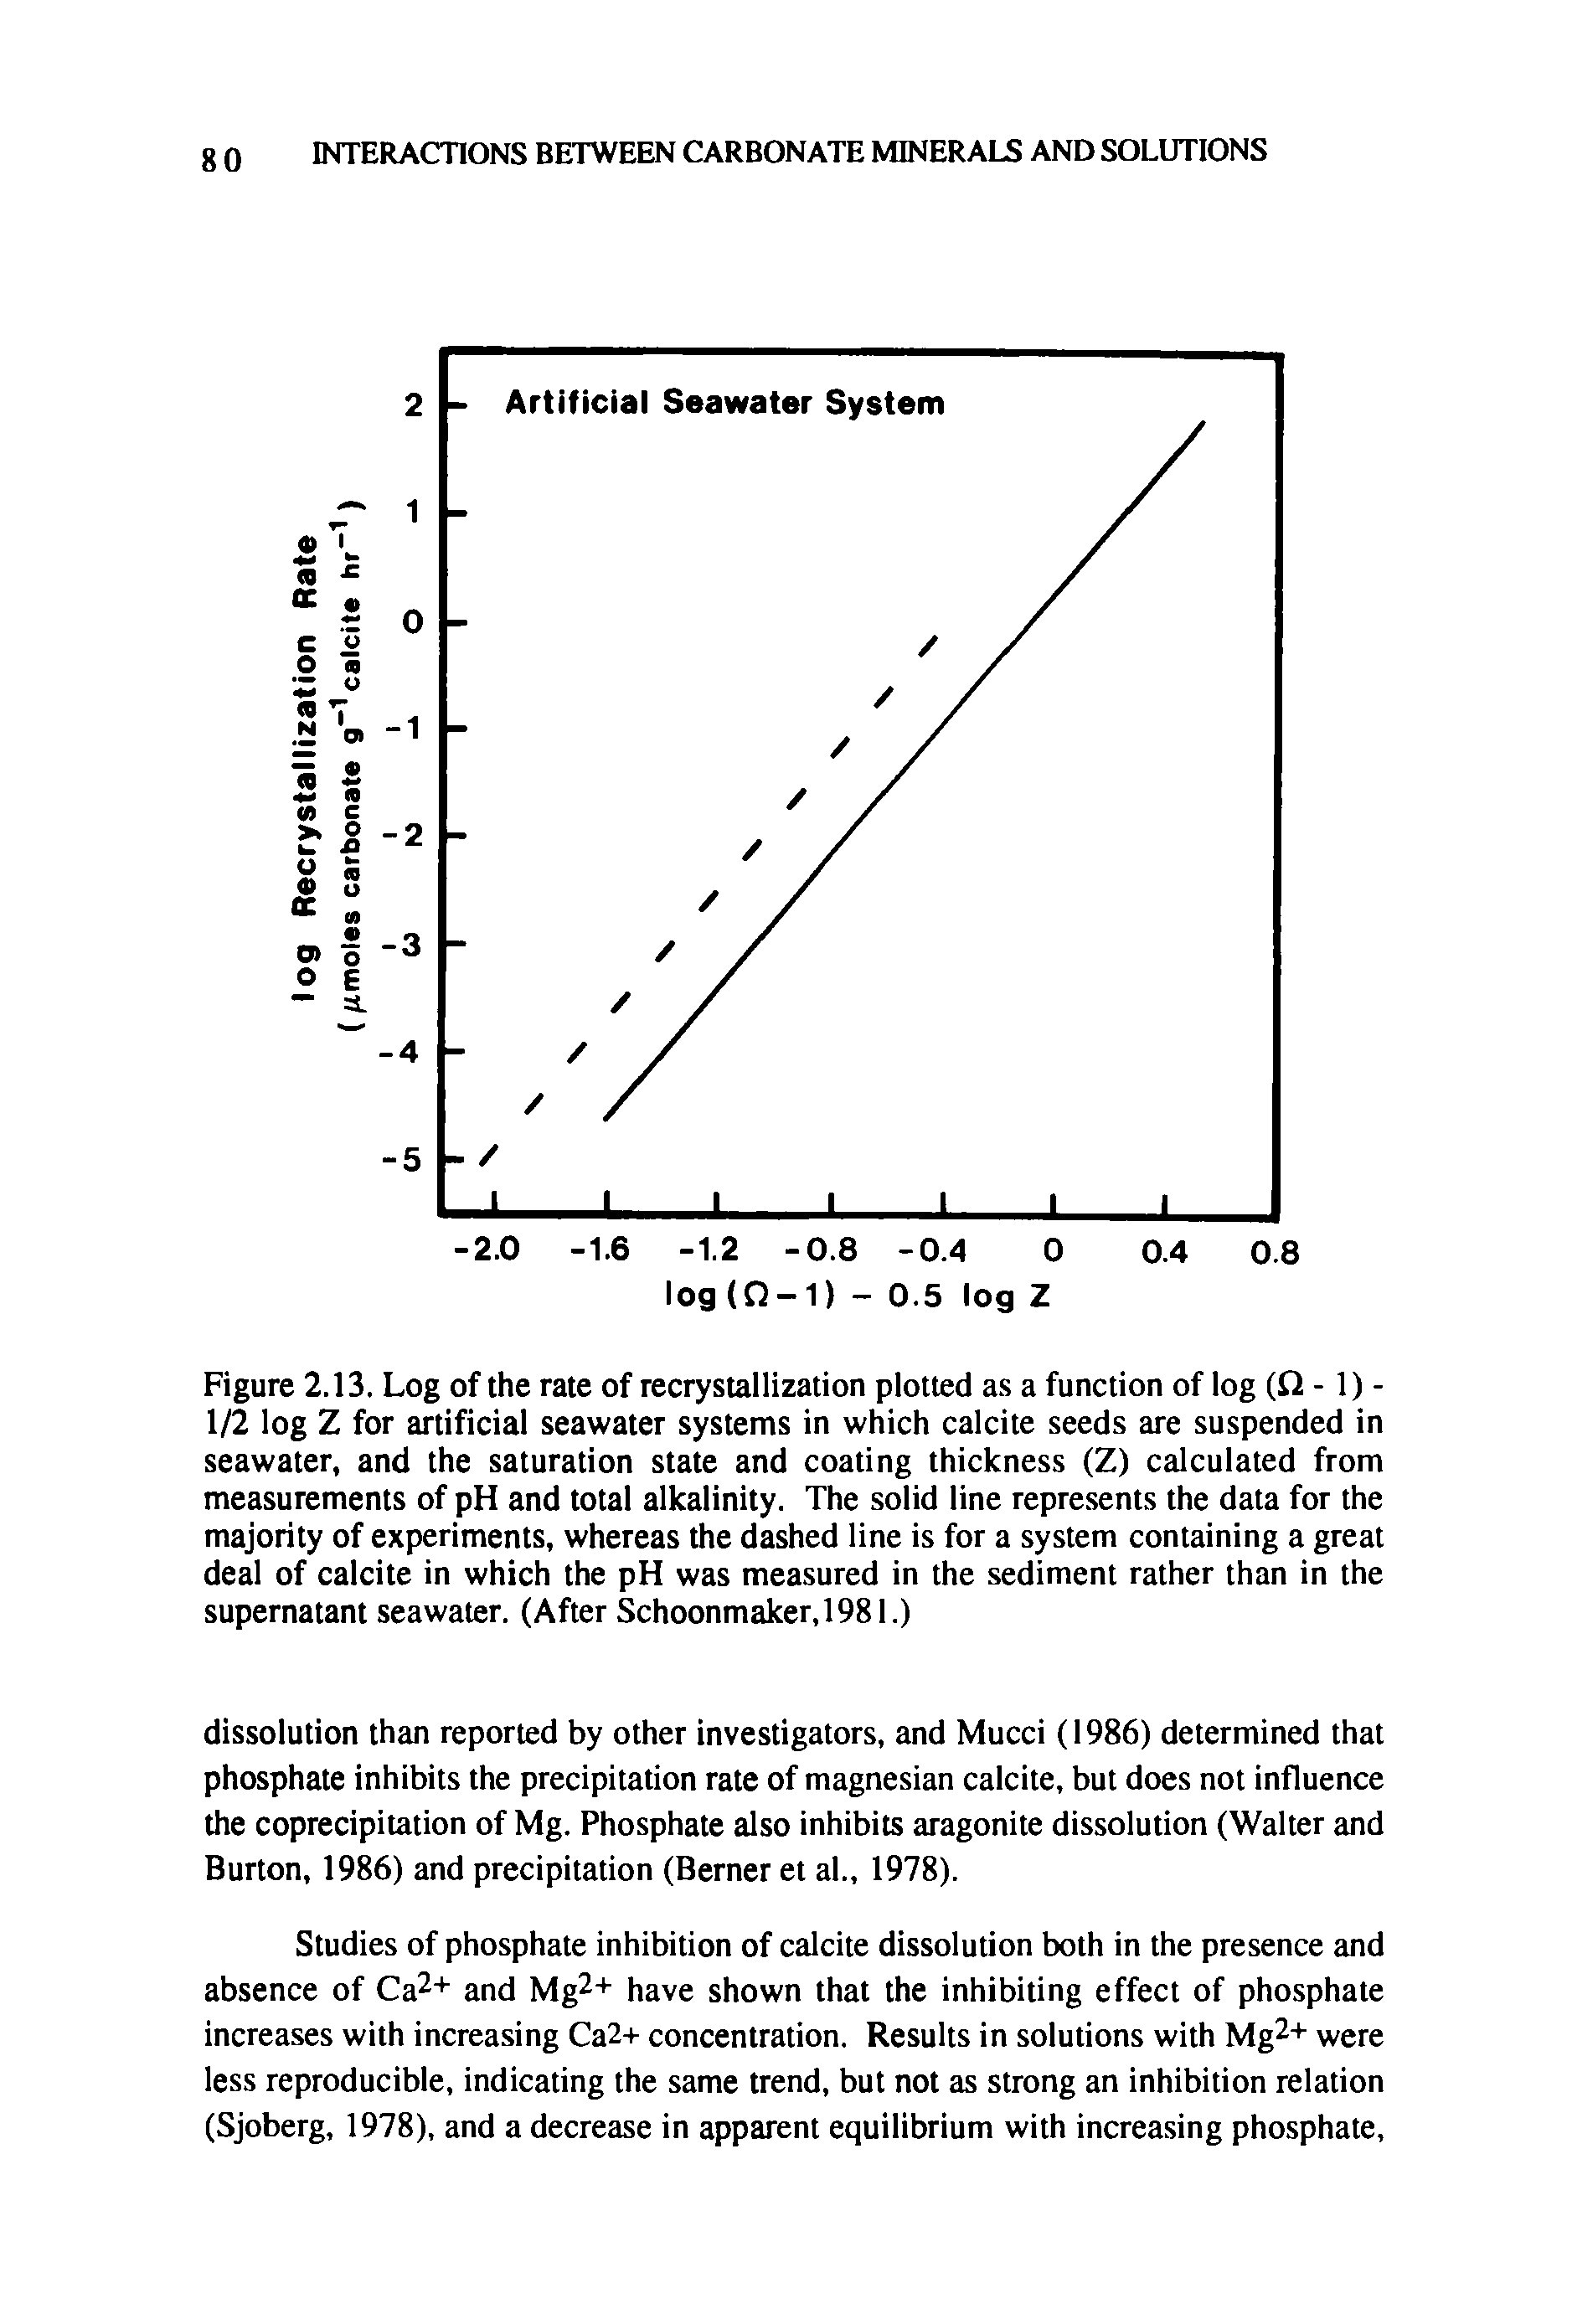 Figure 2.13. Log of the rate of recrystallization plotted as a function of log (Q - 1) -1/2 log Z for artificial seawater systems in which calcite seeds are suspended in seawater, and the saturation state and coating thickness (Z) calculated from measurements of pH and total alkalinity. The solid line represents the data for the majority of experiments, whereas the dashed line is for a system containing a great deal of calcite in which the pH was measured in the sediment rather than in the supernatant seawater. (After Schoonmaker,1981.)...